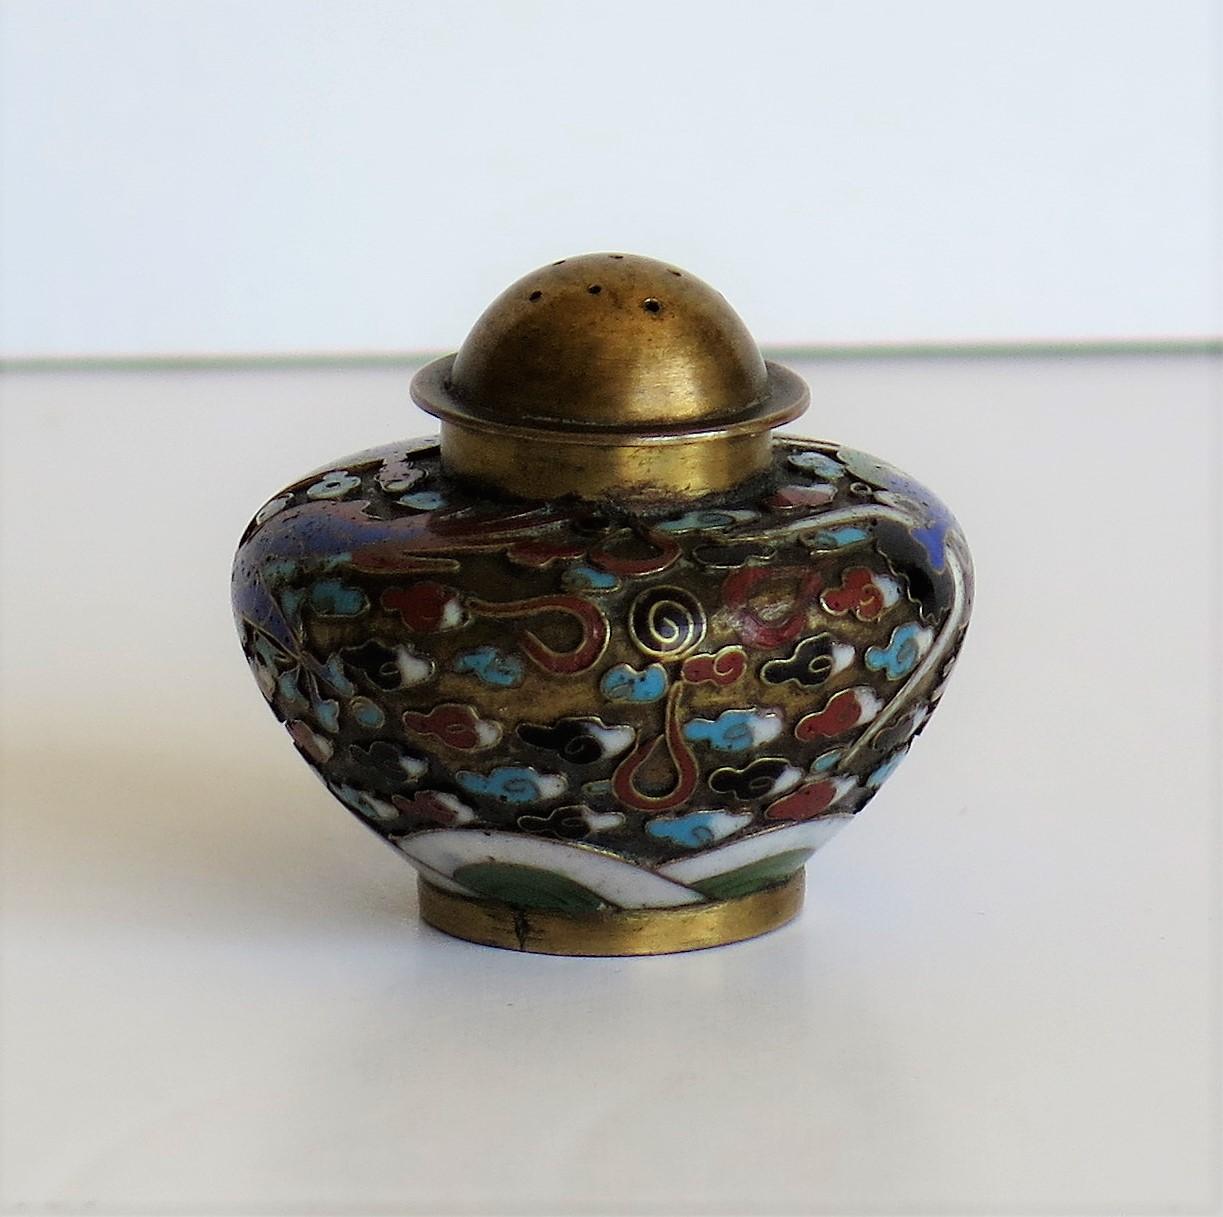 Ceramic 19th Century Chinese Cloisonné Pepper Pot with Dragon Decoration, Qing Dynasty